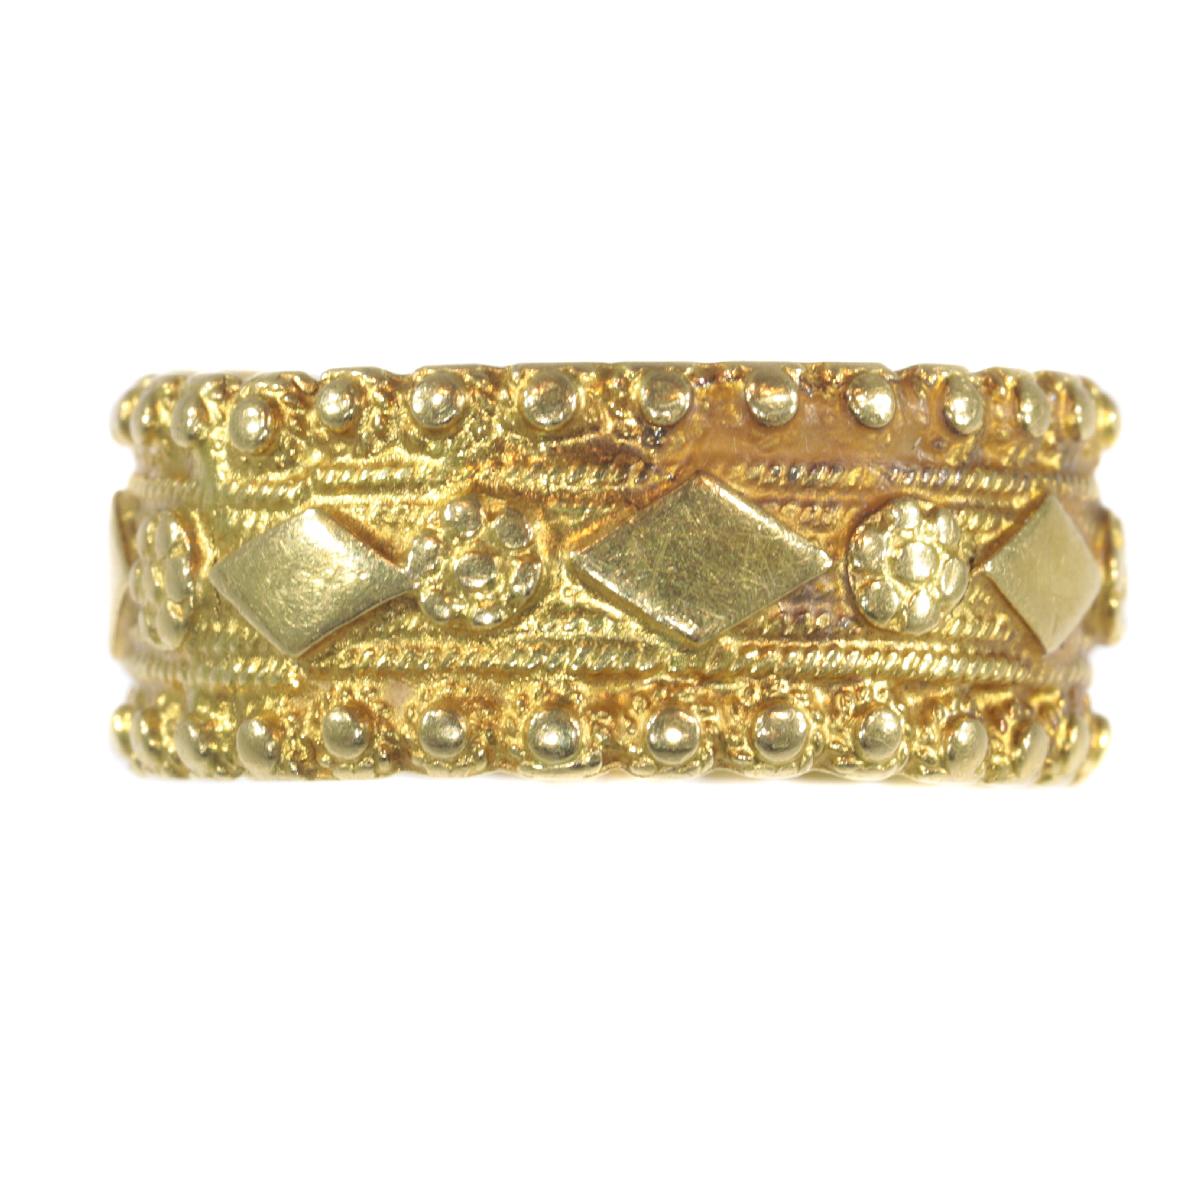 Antique jewelry object group: wedding band

Condition: acceptable condition

Ring size Continental: 59 & 18¾ , Size US 8¾ , Size UK: R
- Resizing is possible but because of the age of the ring we prefer to leave it untouched. We could make an